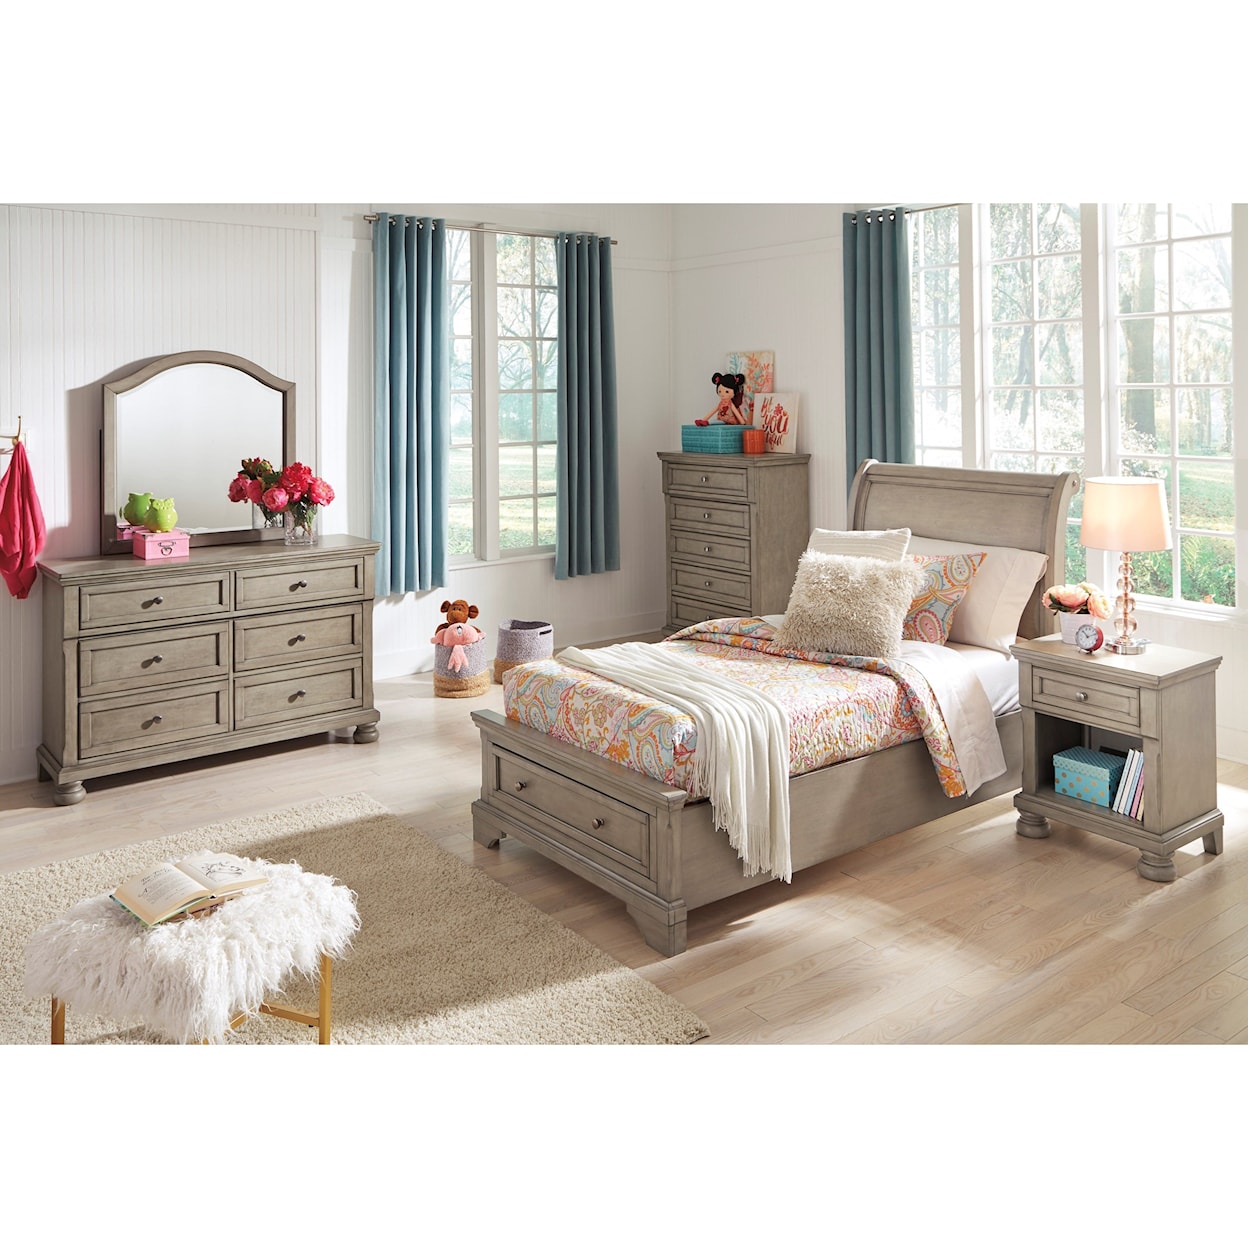 Signature Design by Ashley Furniture Lettner Twin Bedroom Group